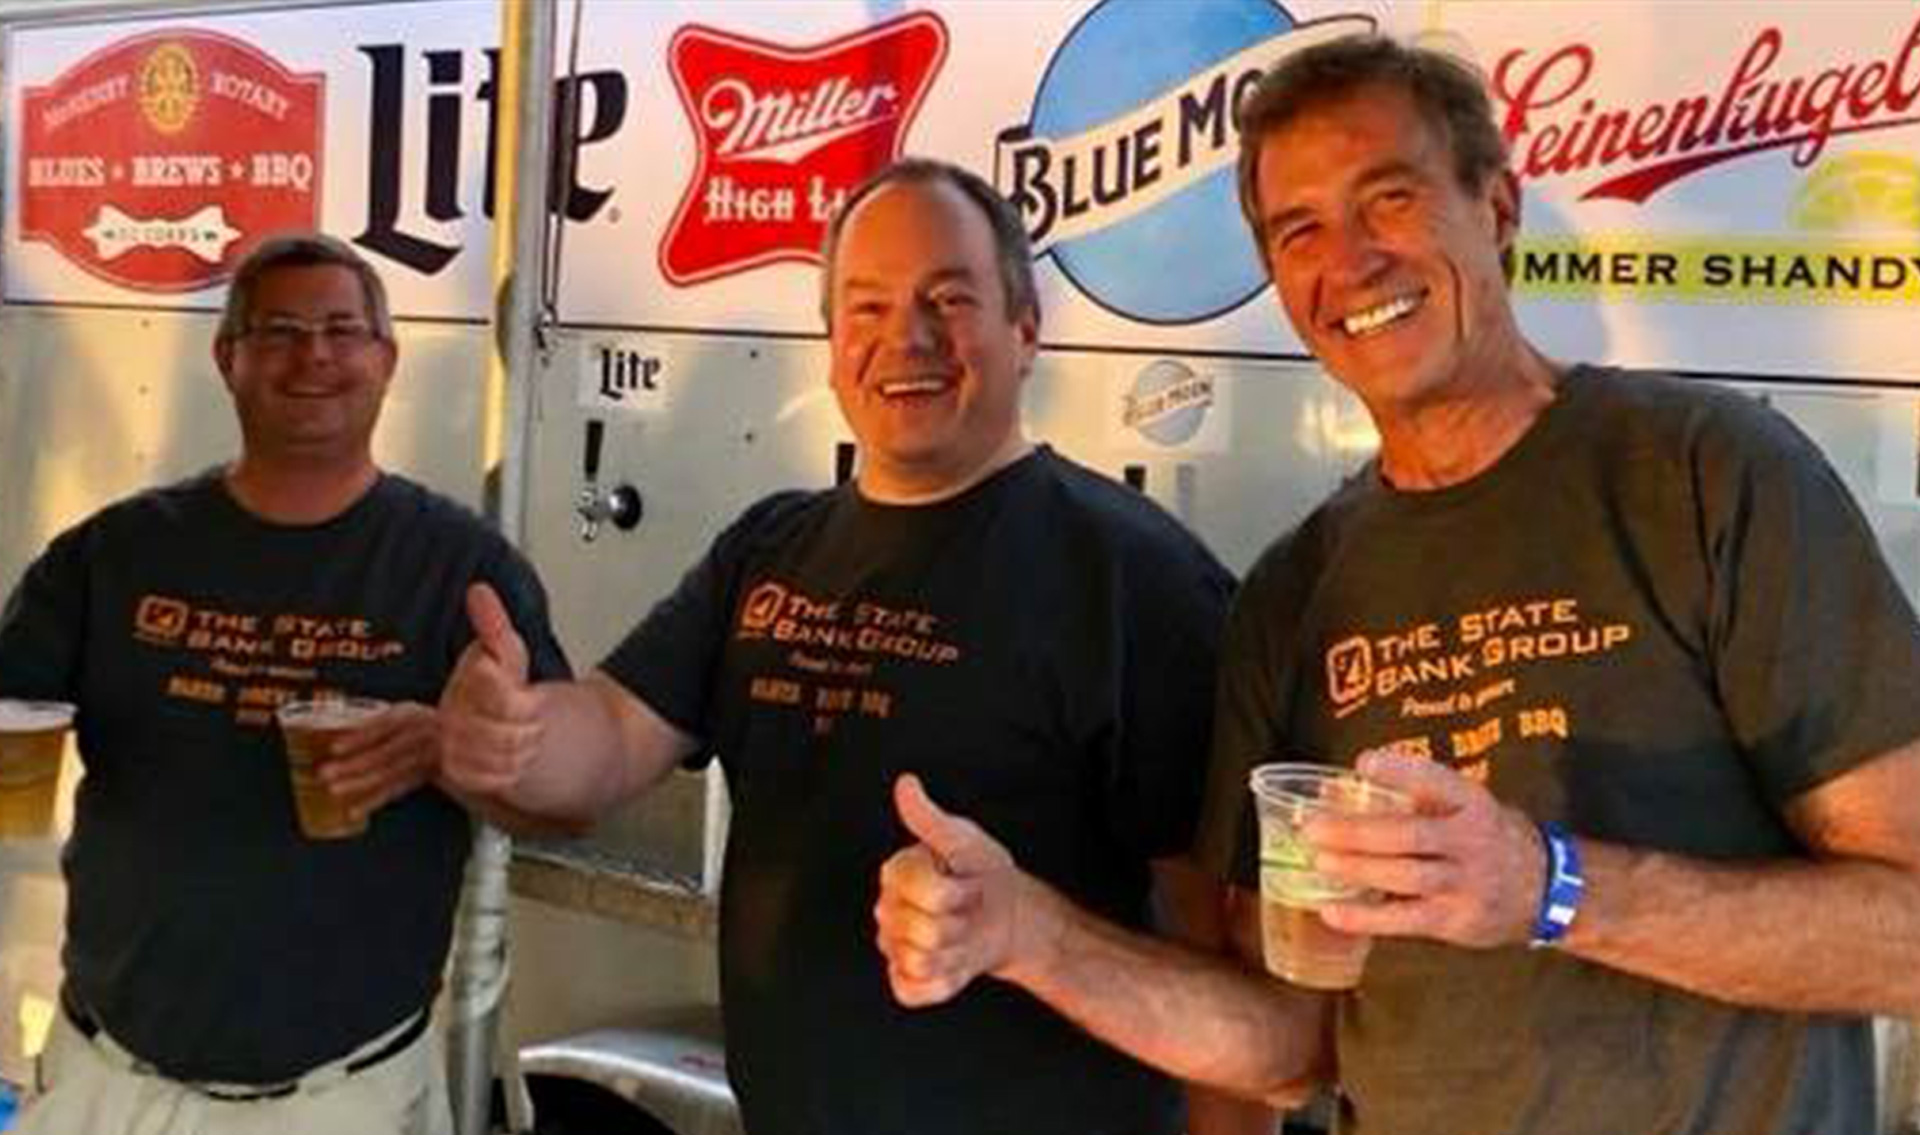 proud sponsor of the Rotary Club of McHenry’s Blues, Brews, and BBQ